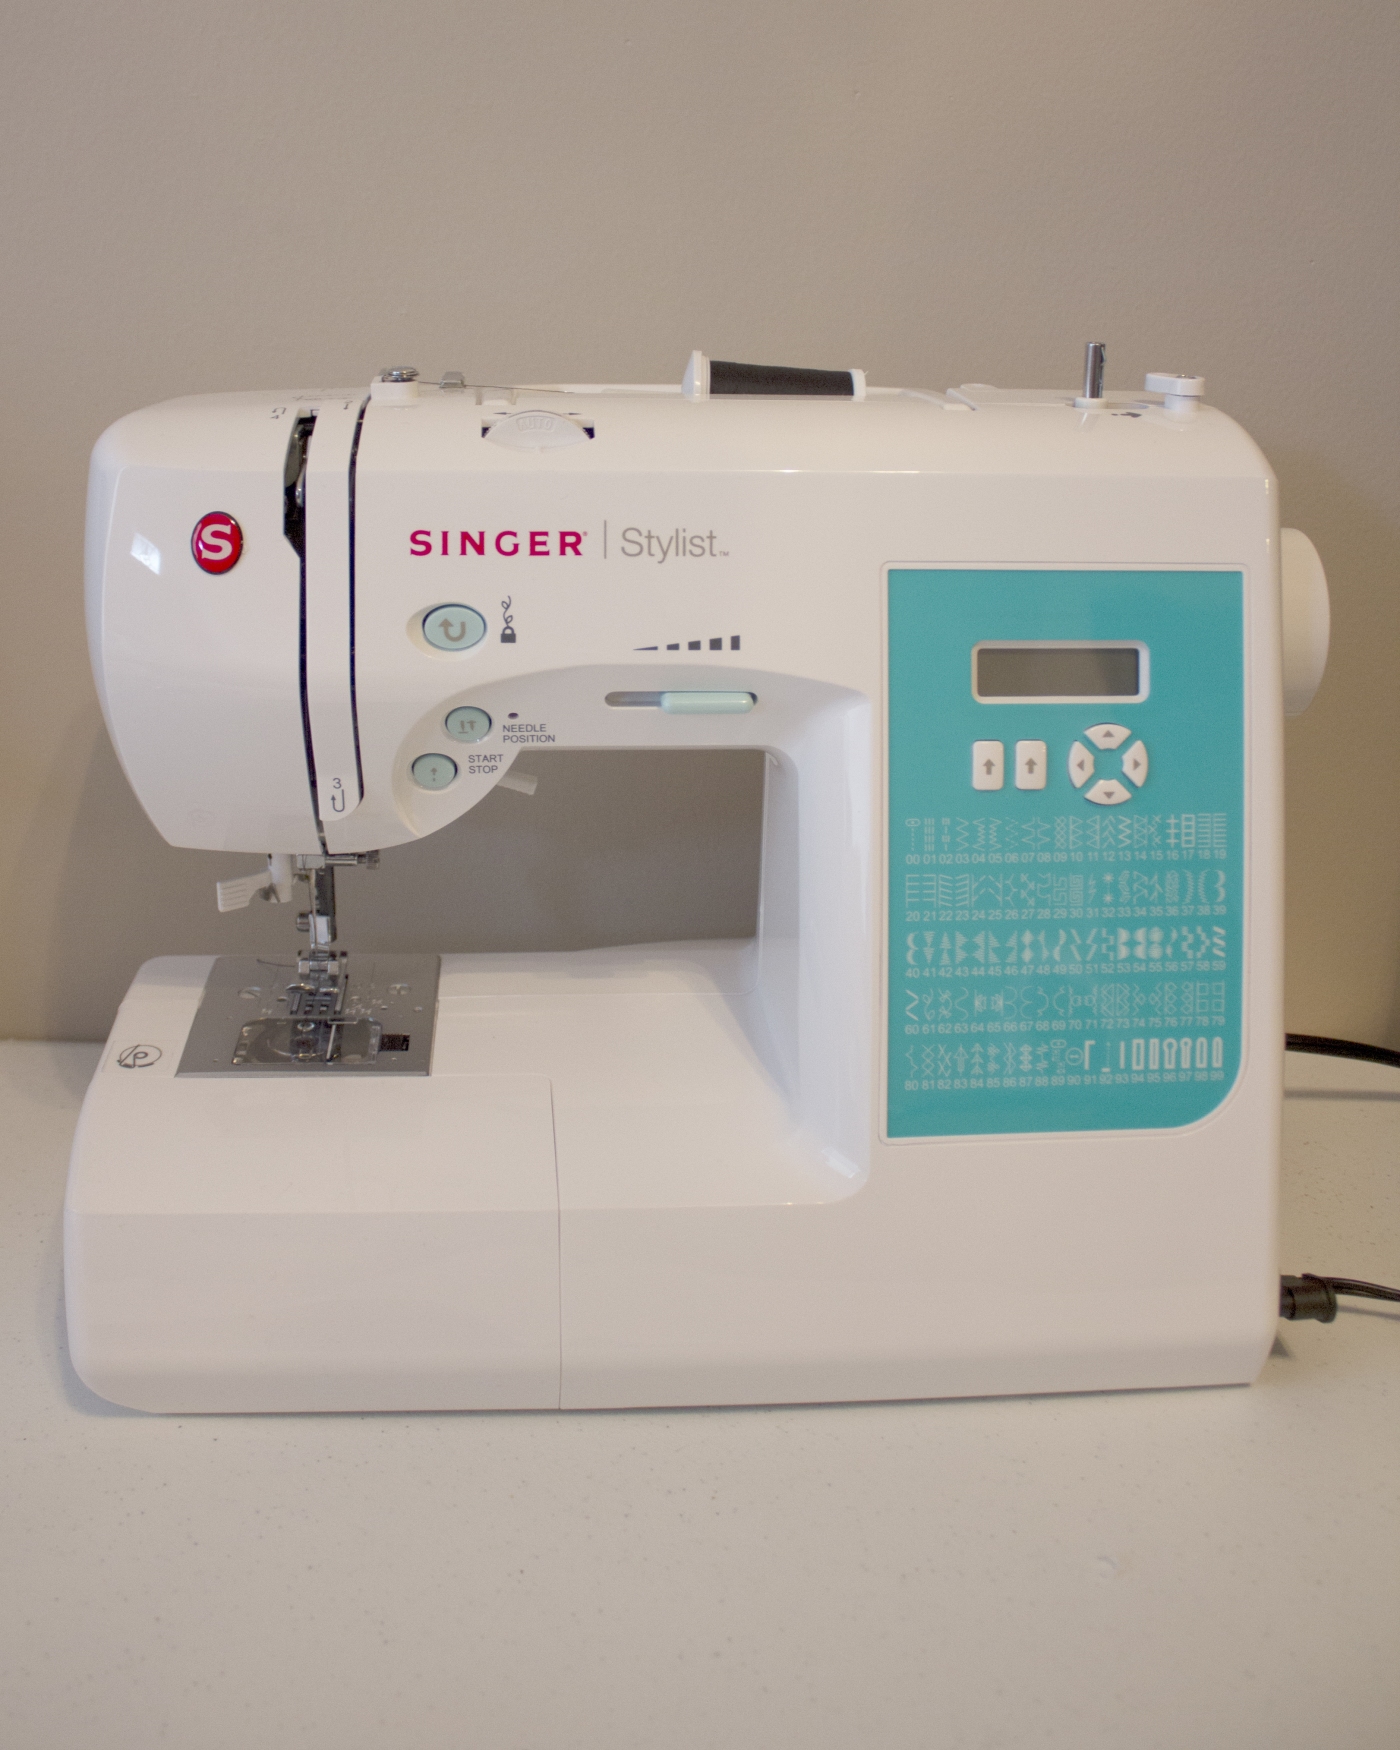 Singer 7258 Stylist Review